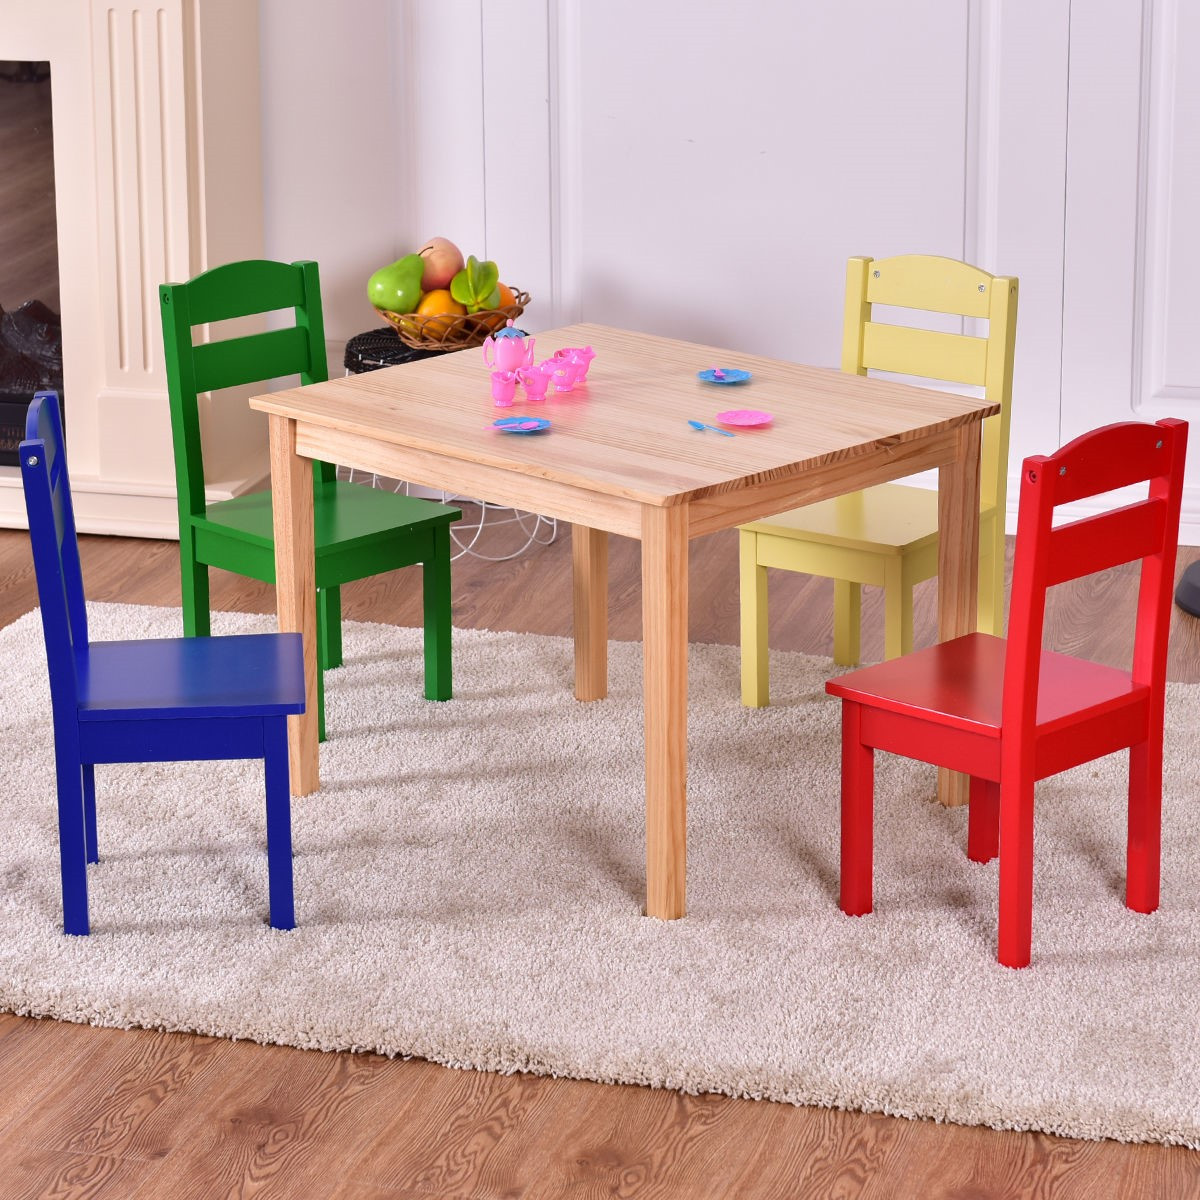 Table For Kids Room
 Costway Kids 5 Piece Table Chair Set Pine Wood Multicolor